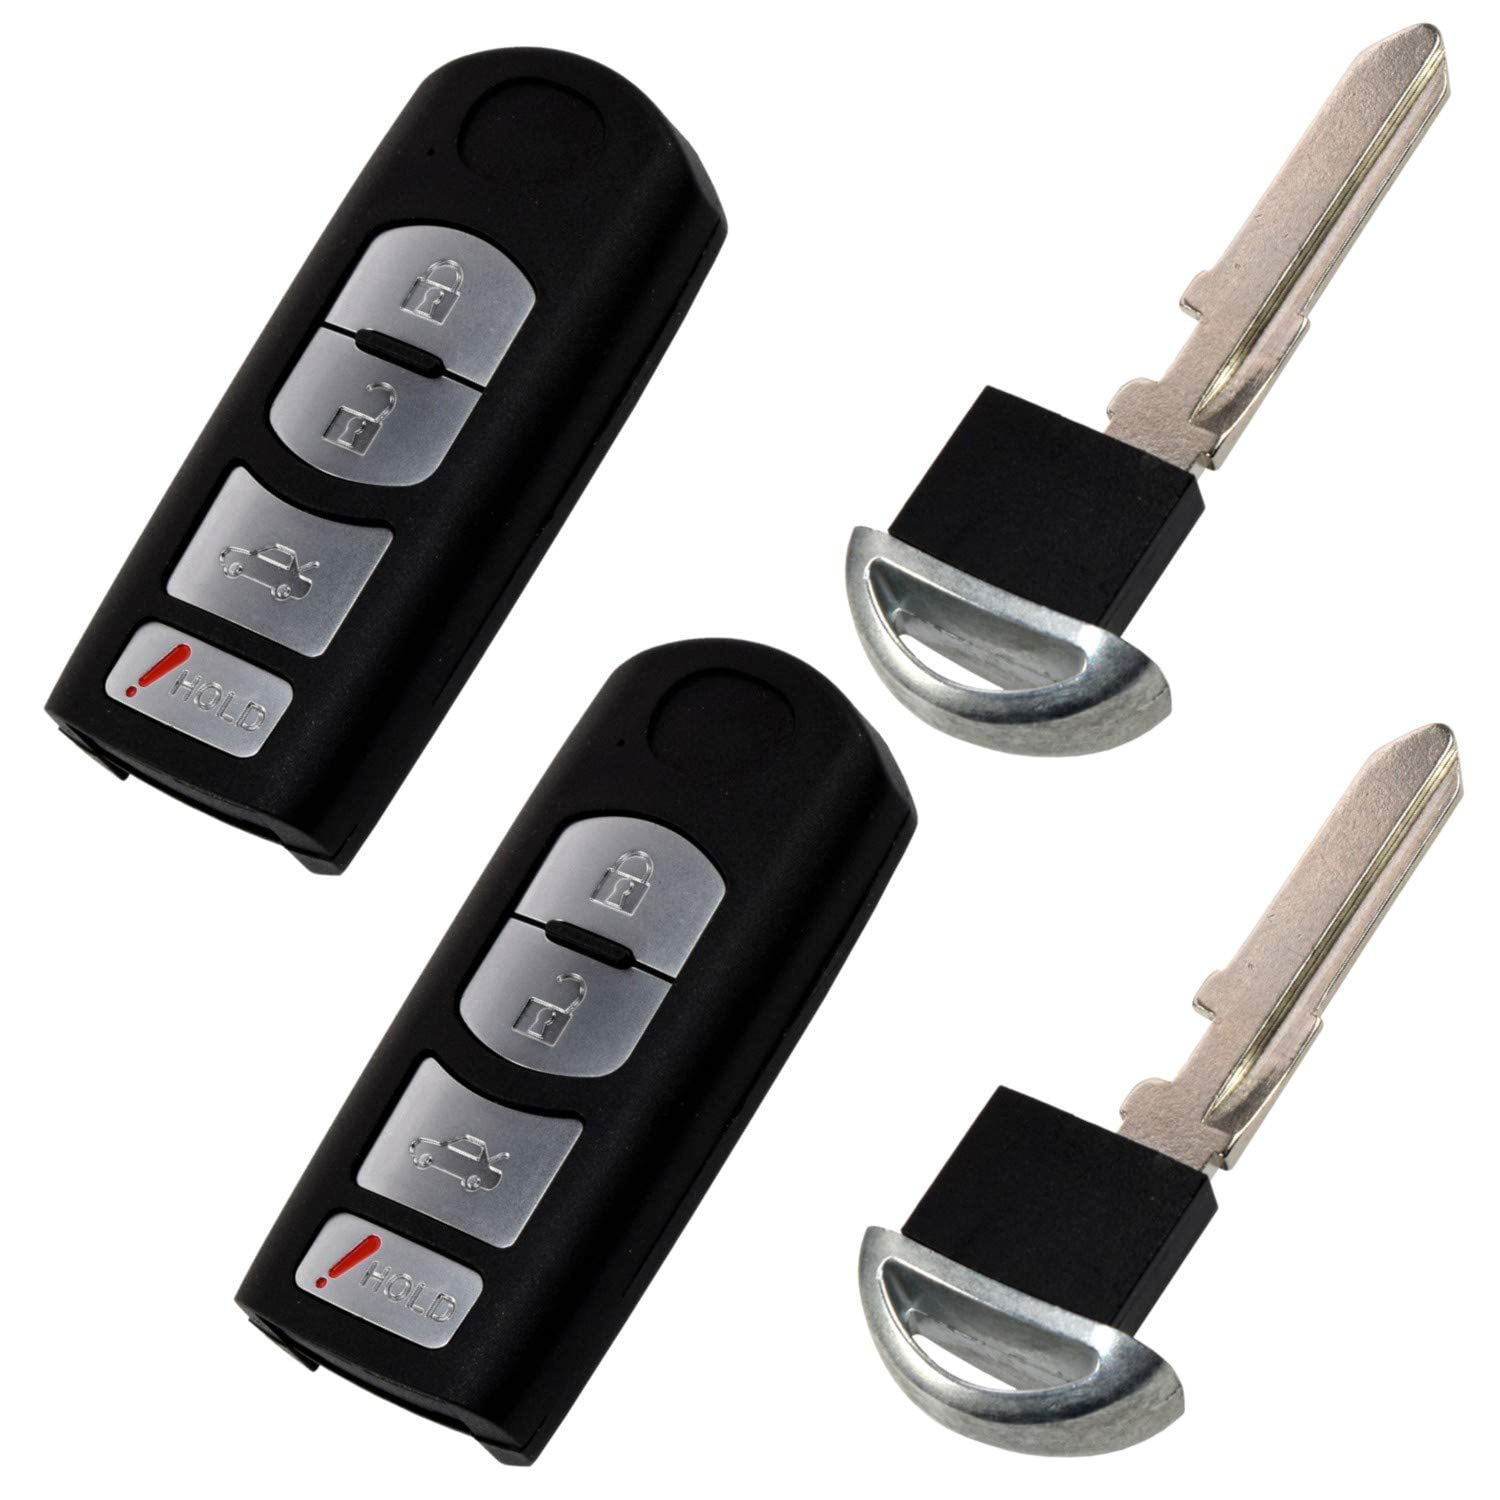 2 For 2011 2012 2013 2014 2015 Mazda 2 Remote Key Fob Shell Case Cover 